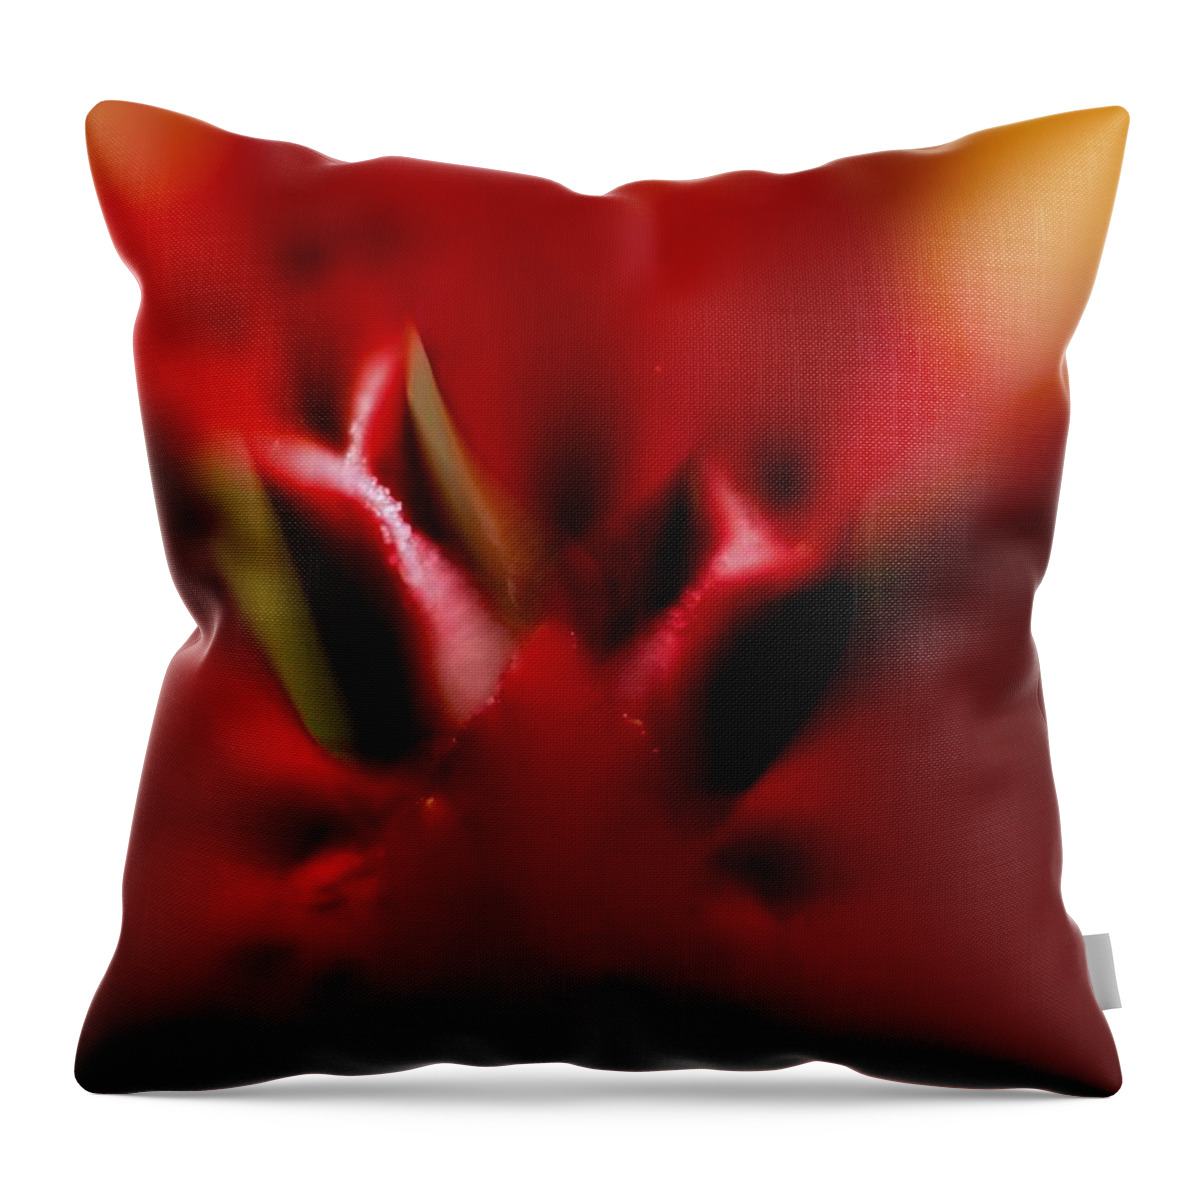  Throw Pillow featuring the photograph Colorful Floral by Max Greene